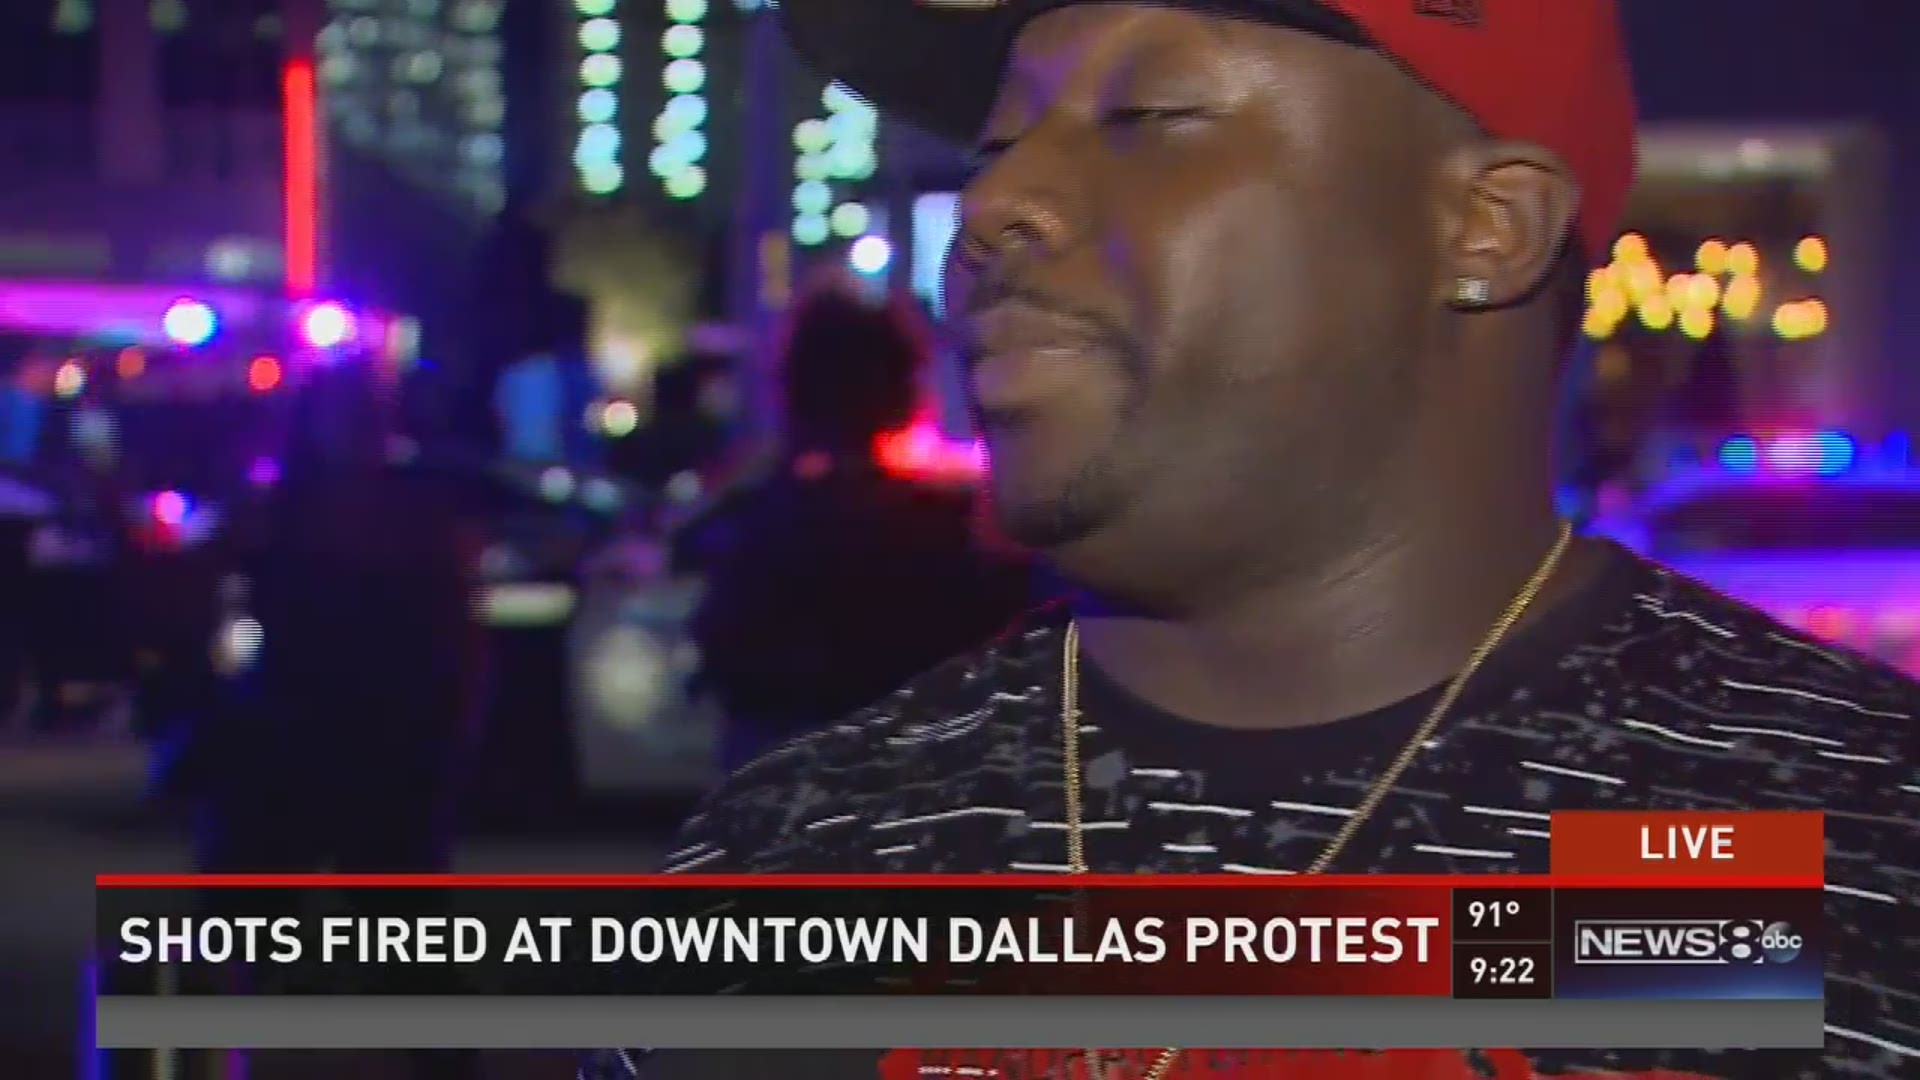 News 8's Marie Saavedra interviews a man who says he was there as a gunman opened fire on police officers at a protest against police violence across the country.